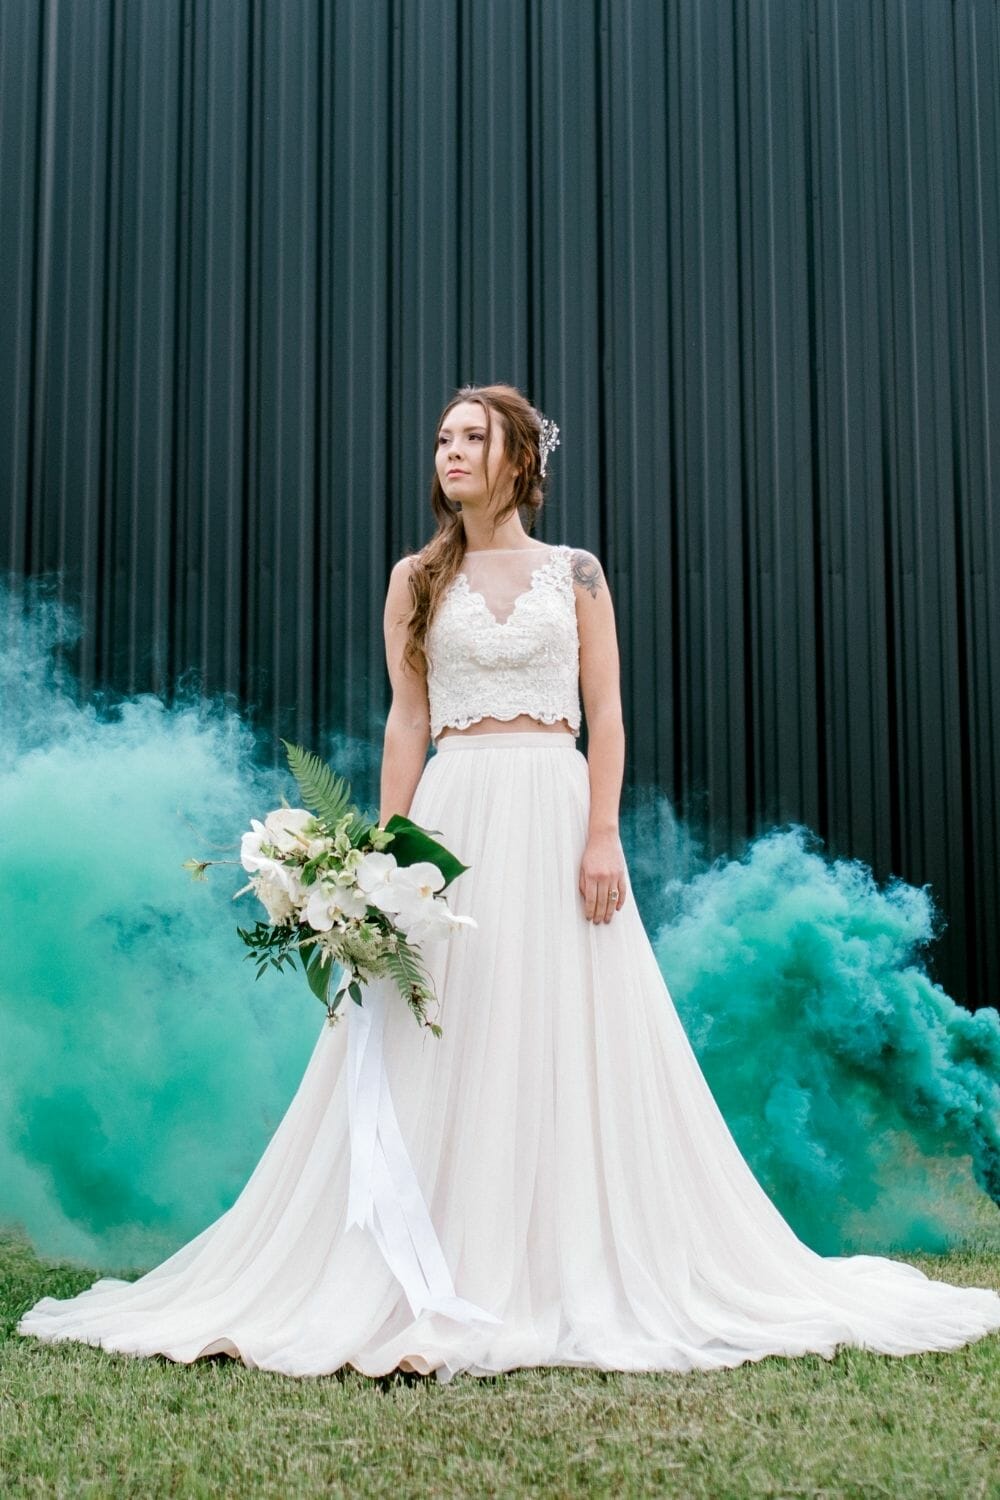 Bride standing in green mist background in Separates Wedding Dress photo by Sabel Moments Photography